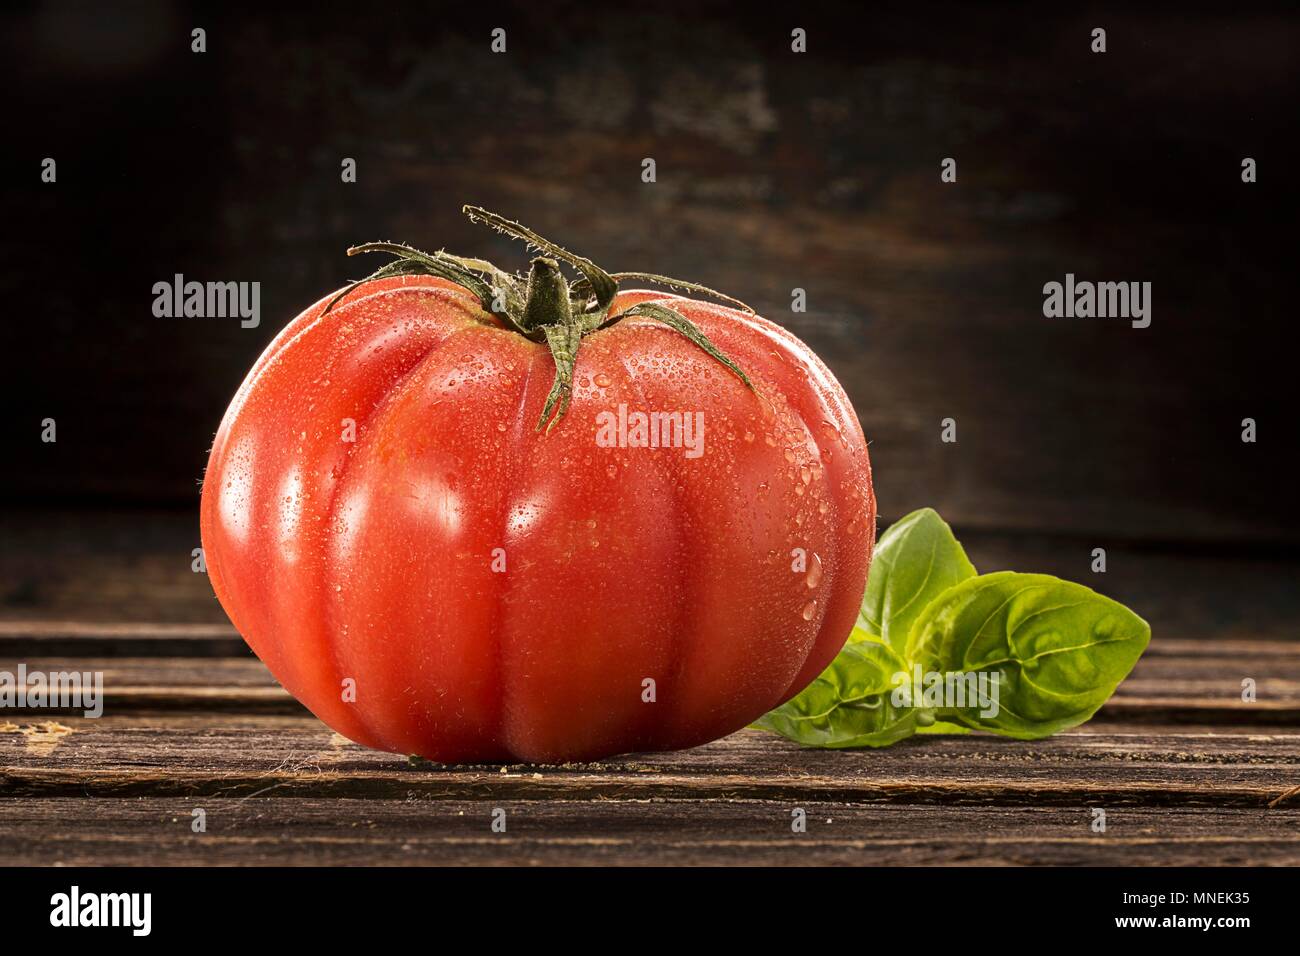 A beefsteak tomato with water droplets Stock Photo